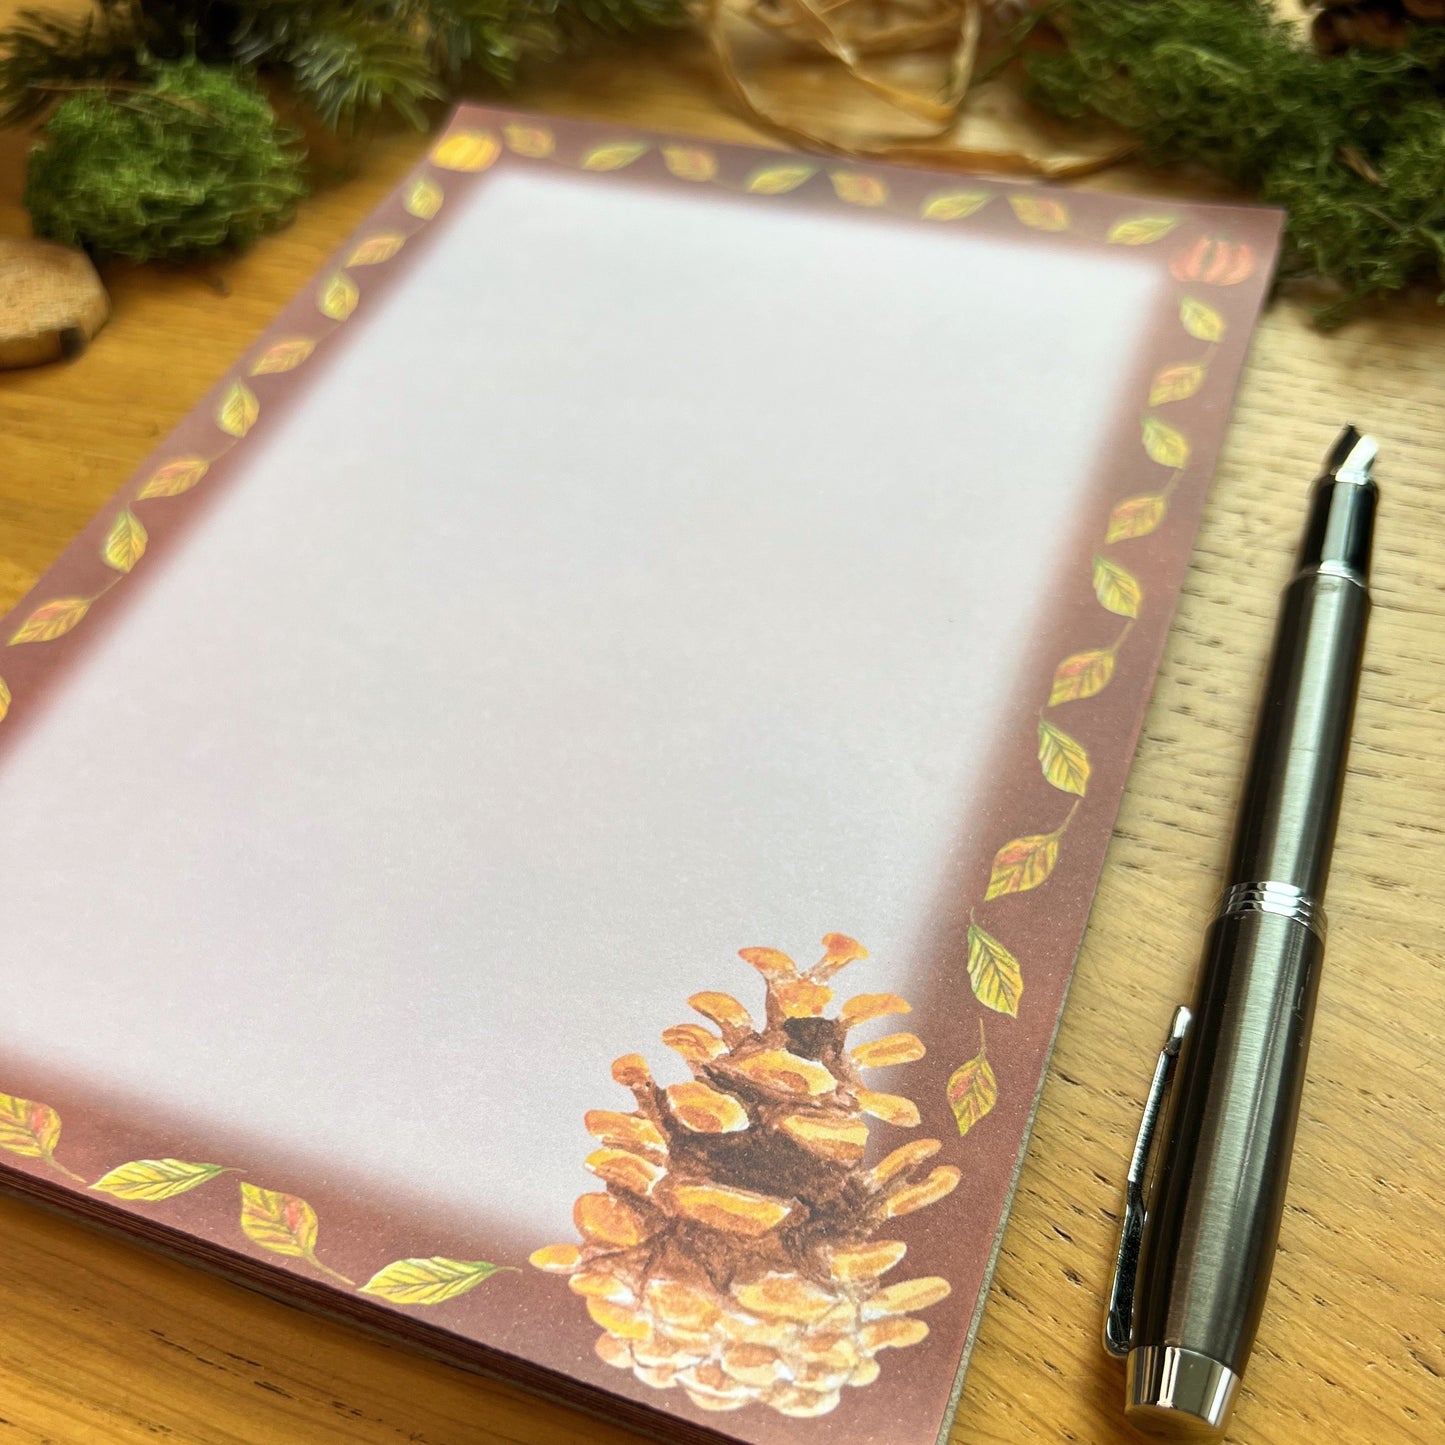 Autumnal pine cone illustrated notepad with warm brown leaf and pumpkin illustrated border around the page. The writing paper is blank. Notepad is on a wooden desk decorated with green moss, straw, pine cones and wooden slices and a fountain ink pen